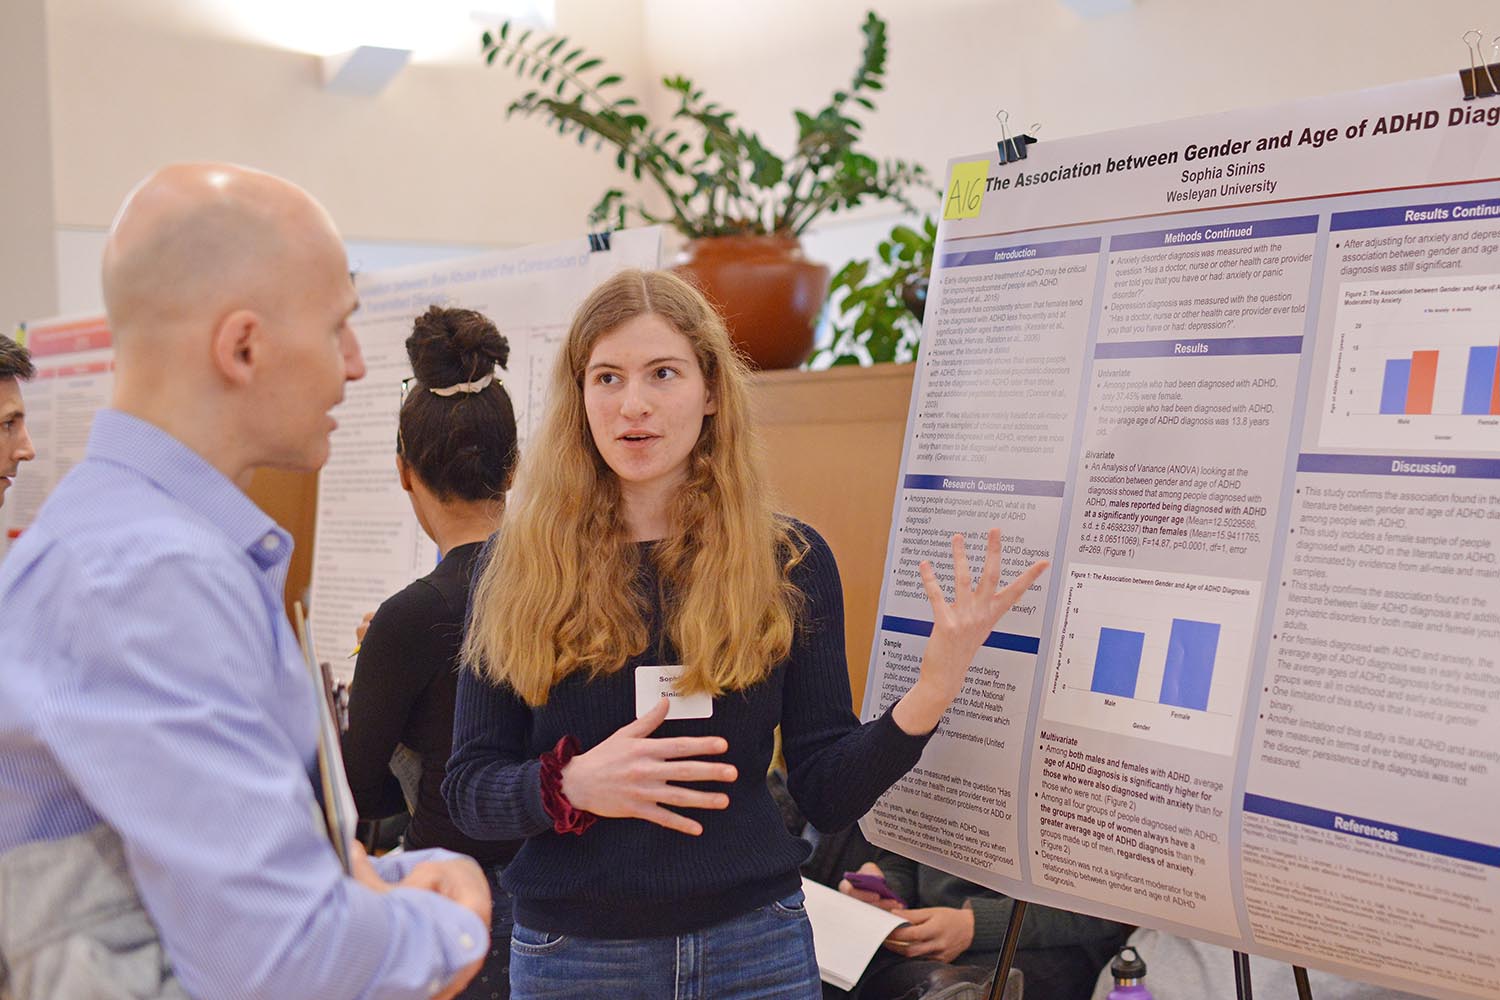  Sophia Sinins '22 shared the results from her study titled, "The Association between Gender and Age of ADHD Diagnosis."